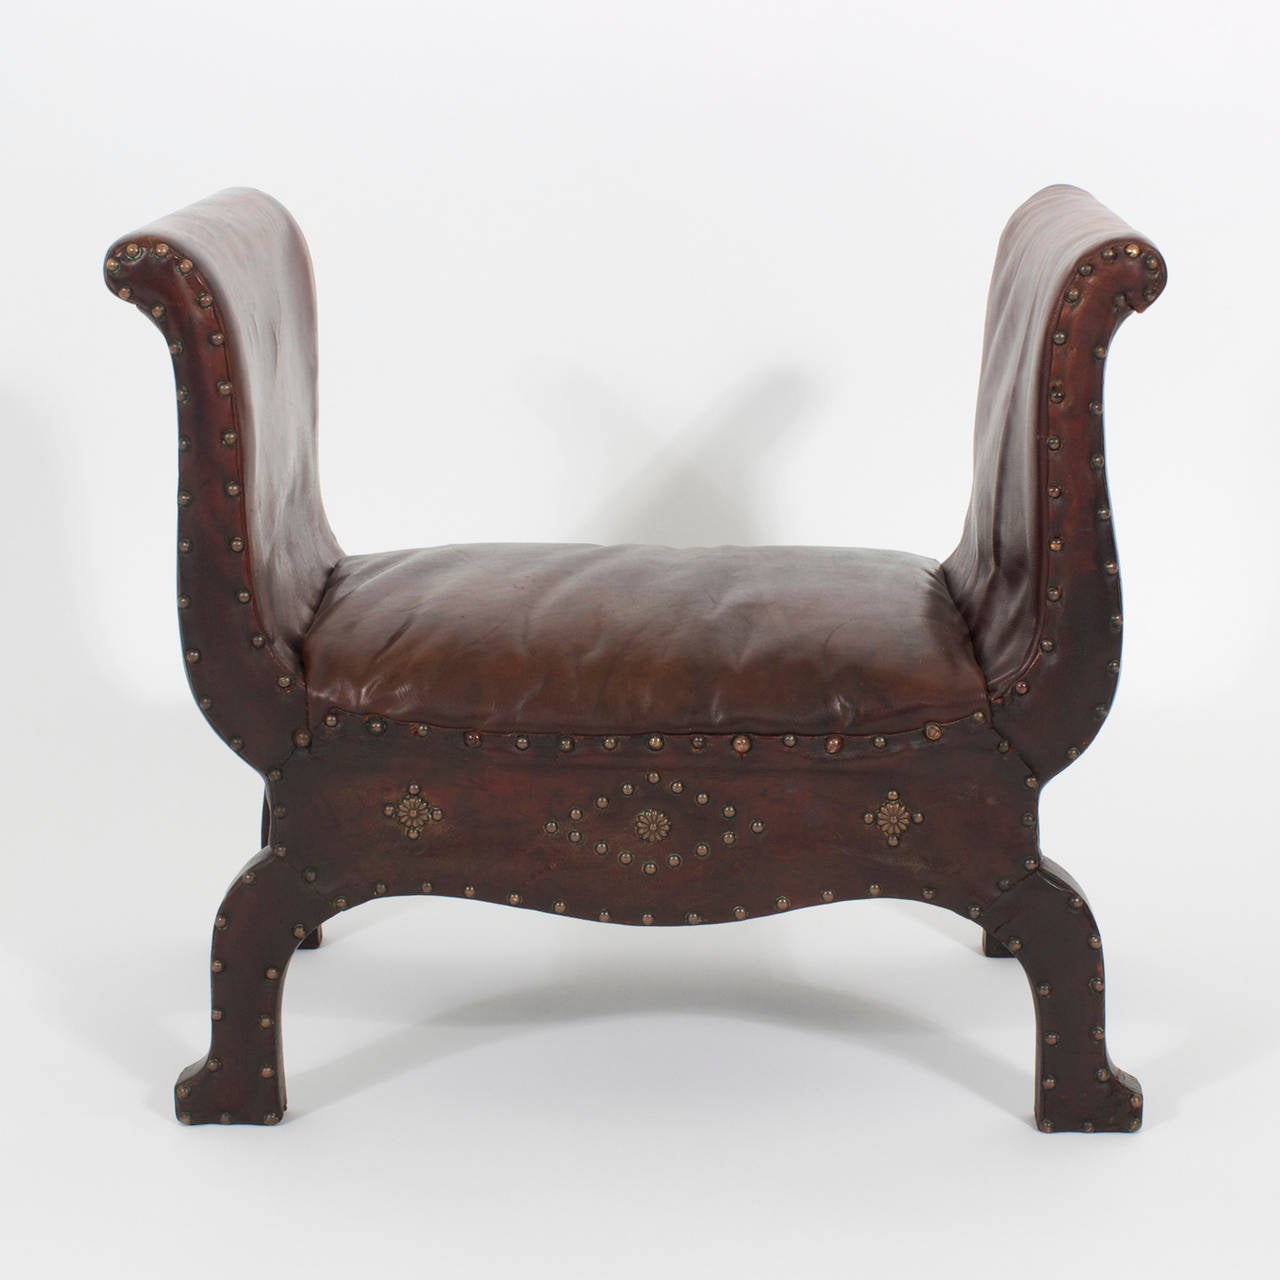 Antique Leather Foot Stool with Nail Head Trim In Good Condition For Sale In Palm Beach, FL